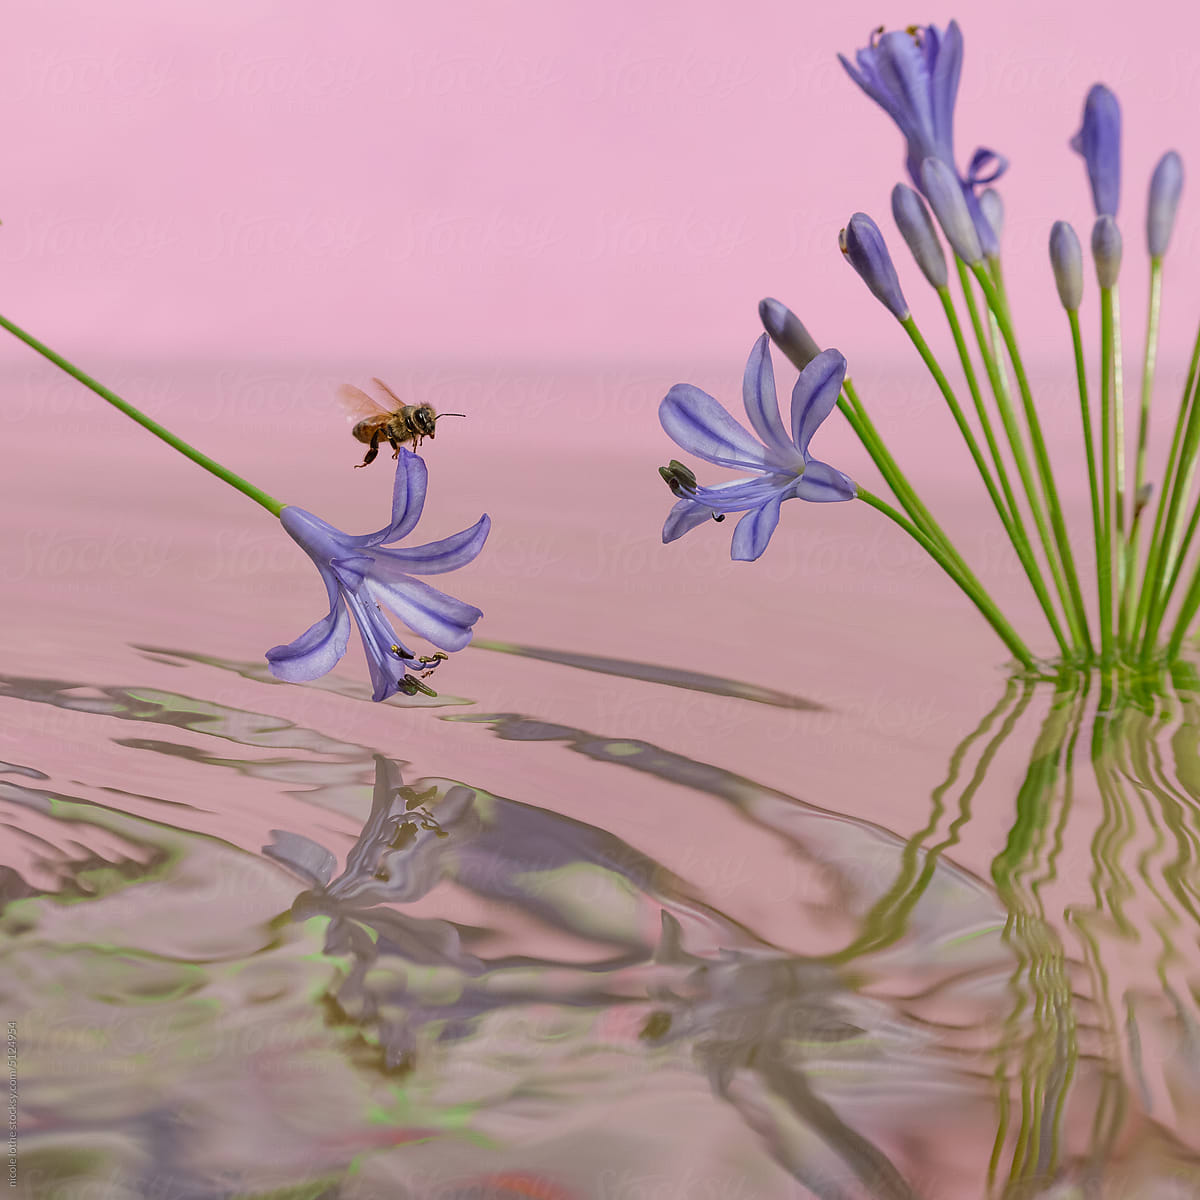 Bee taking off petal, psychedelic reflections.